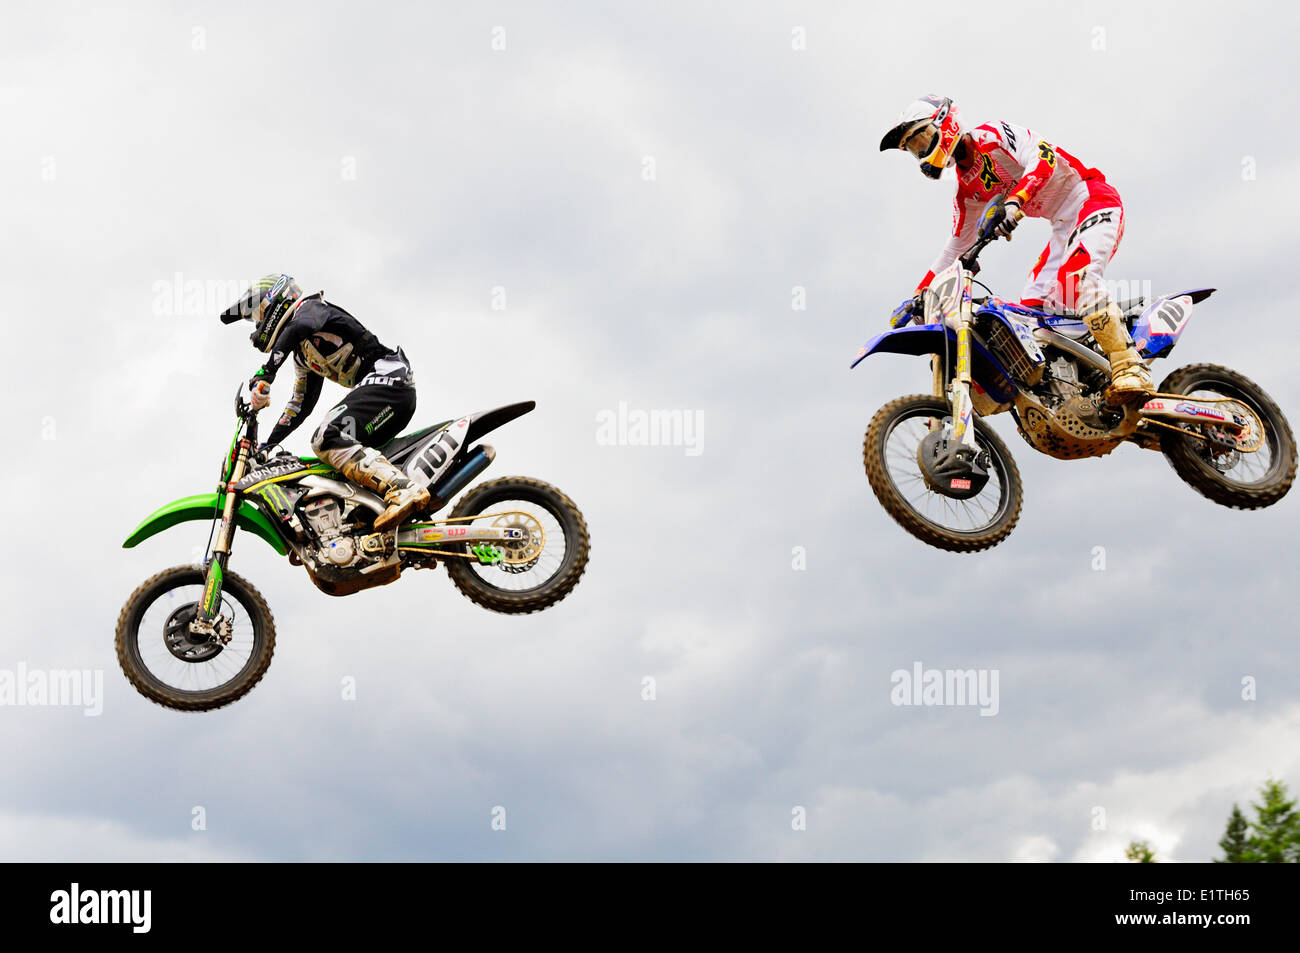 Two motocross riders, #101 and #10, are airborne after a jump at the Monster Energy Motocross Nationals at the Wastelands track Stock Photo